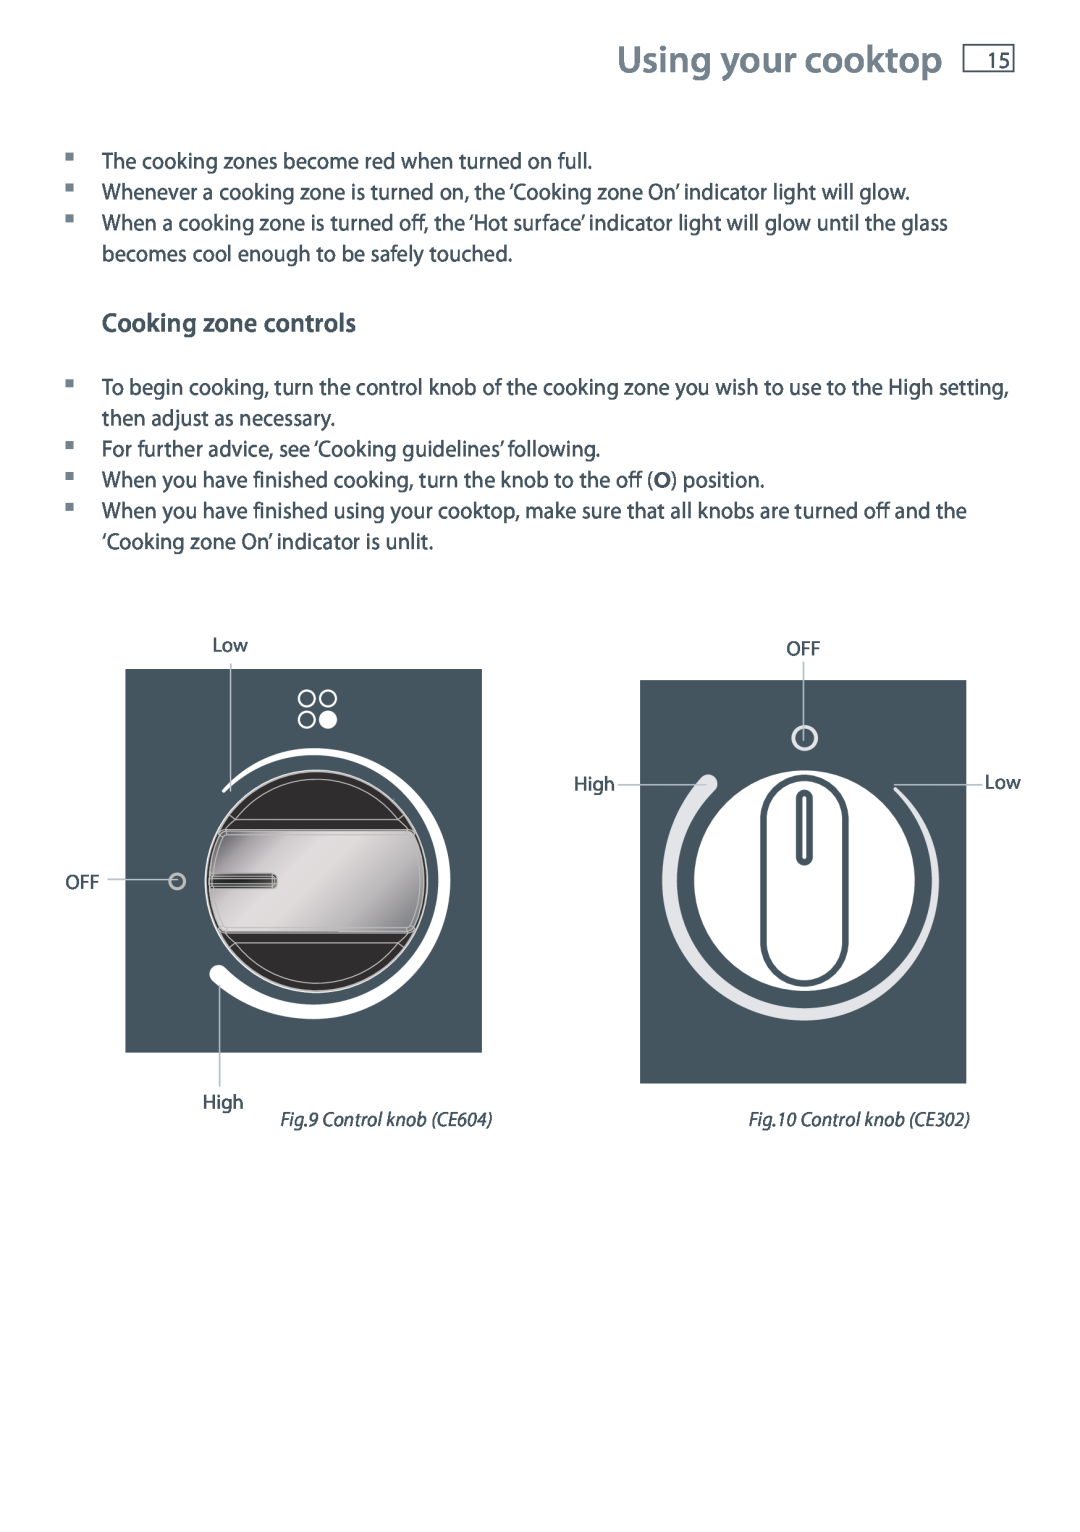 Fisher & Paykel CE604, CE302 installation instructions Using your cooktop, Cooking zone controls 